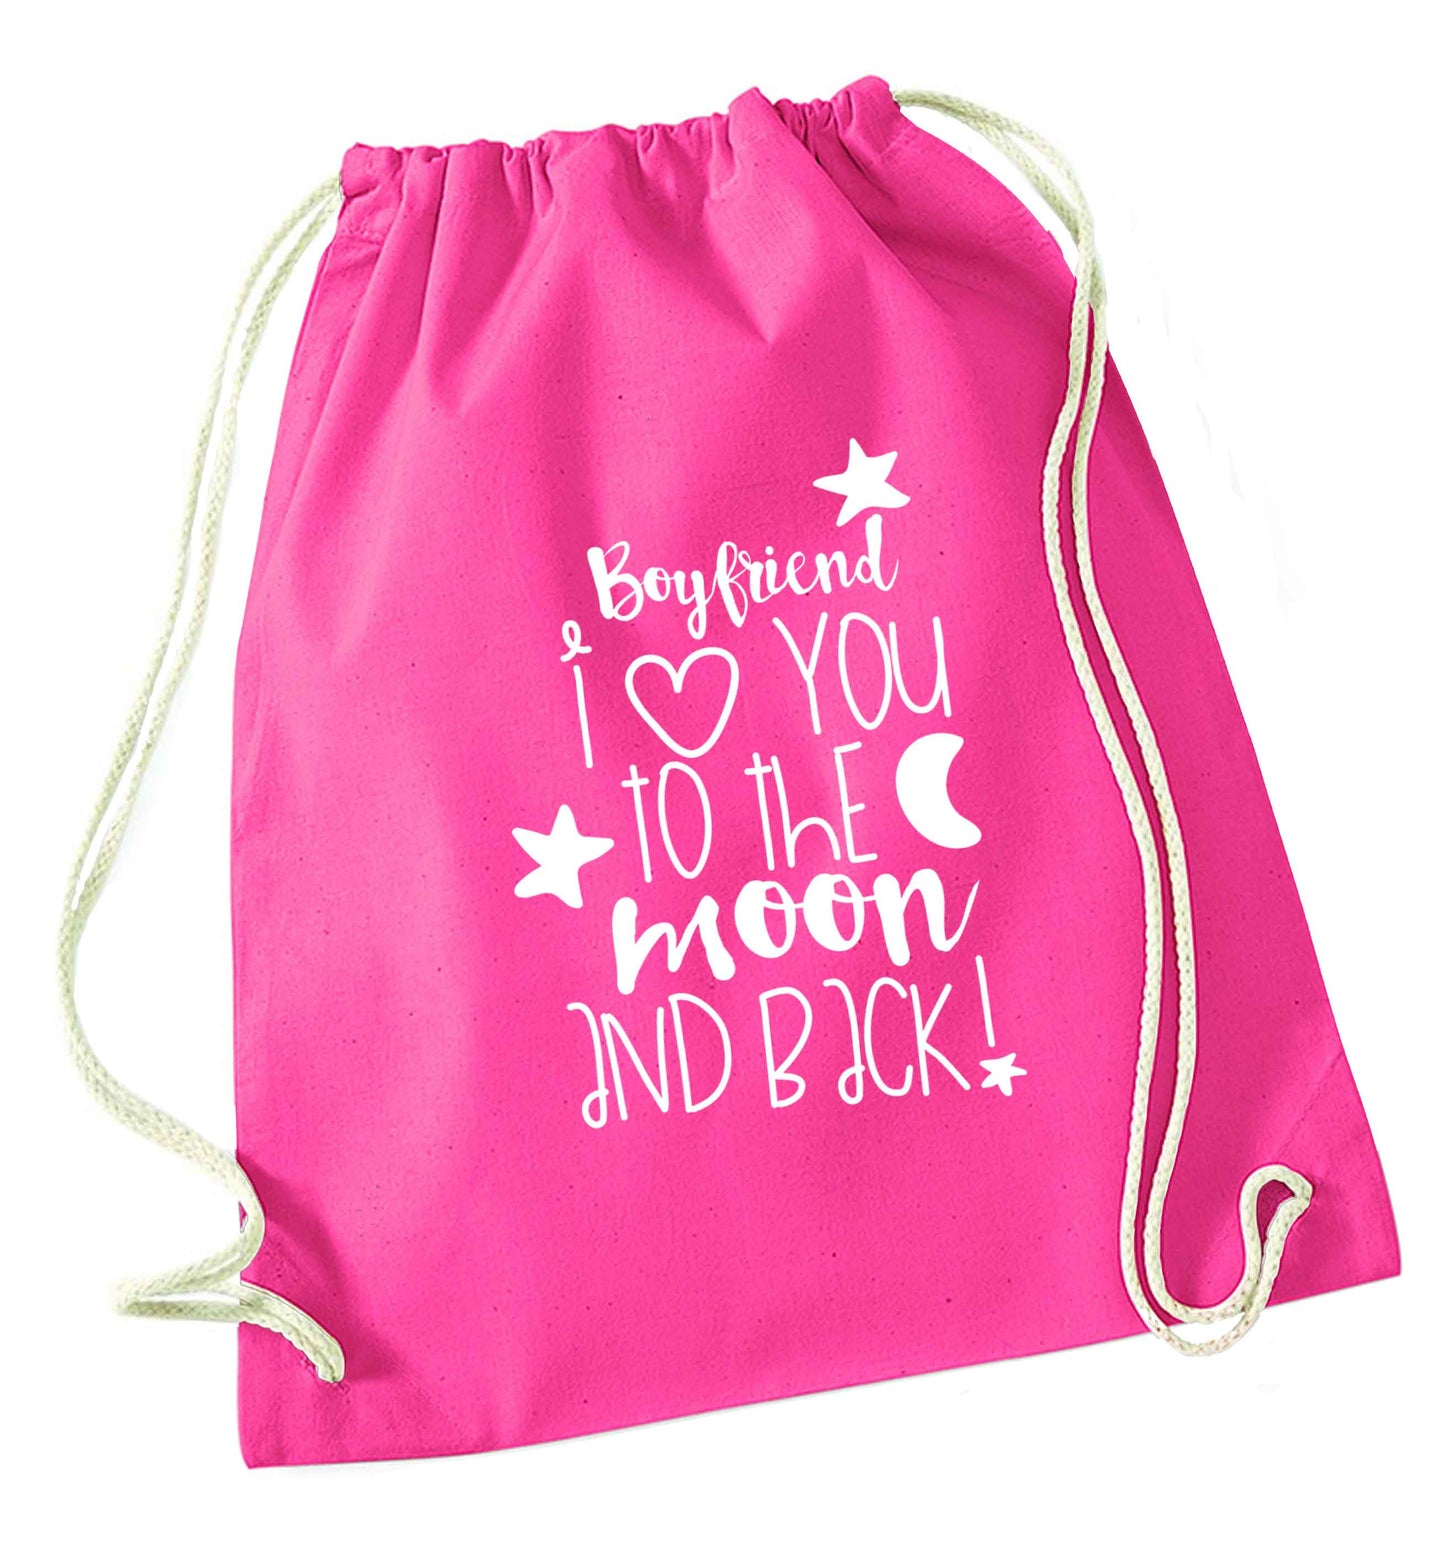 Boyfriend I love you to the moon and back pink drawstring bag